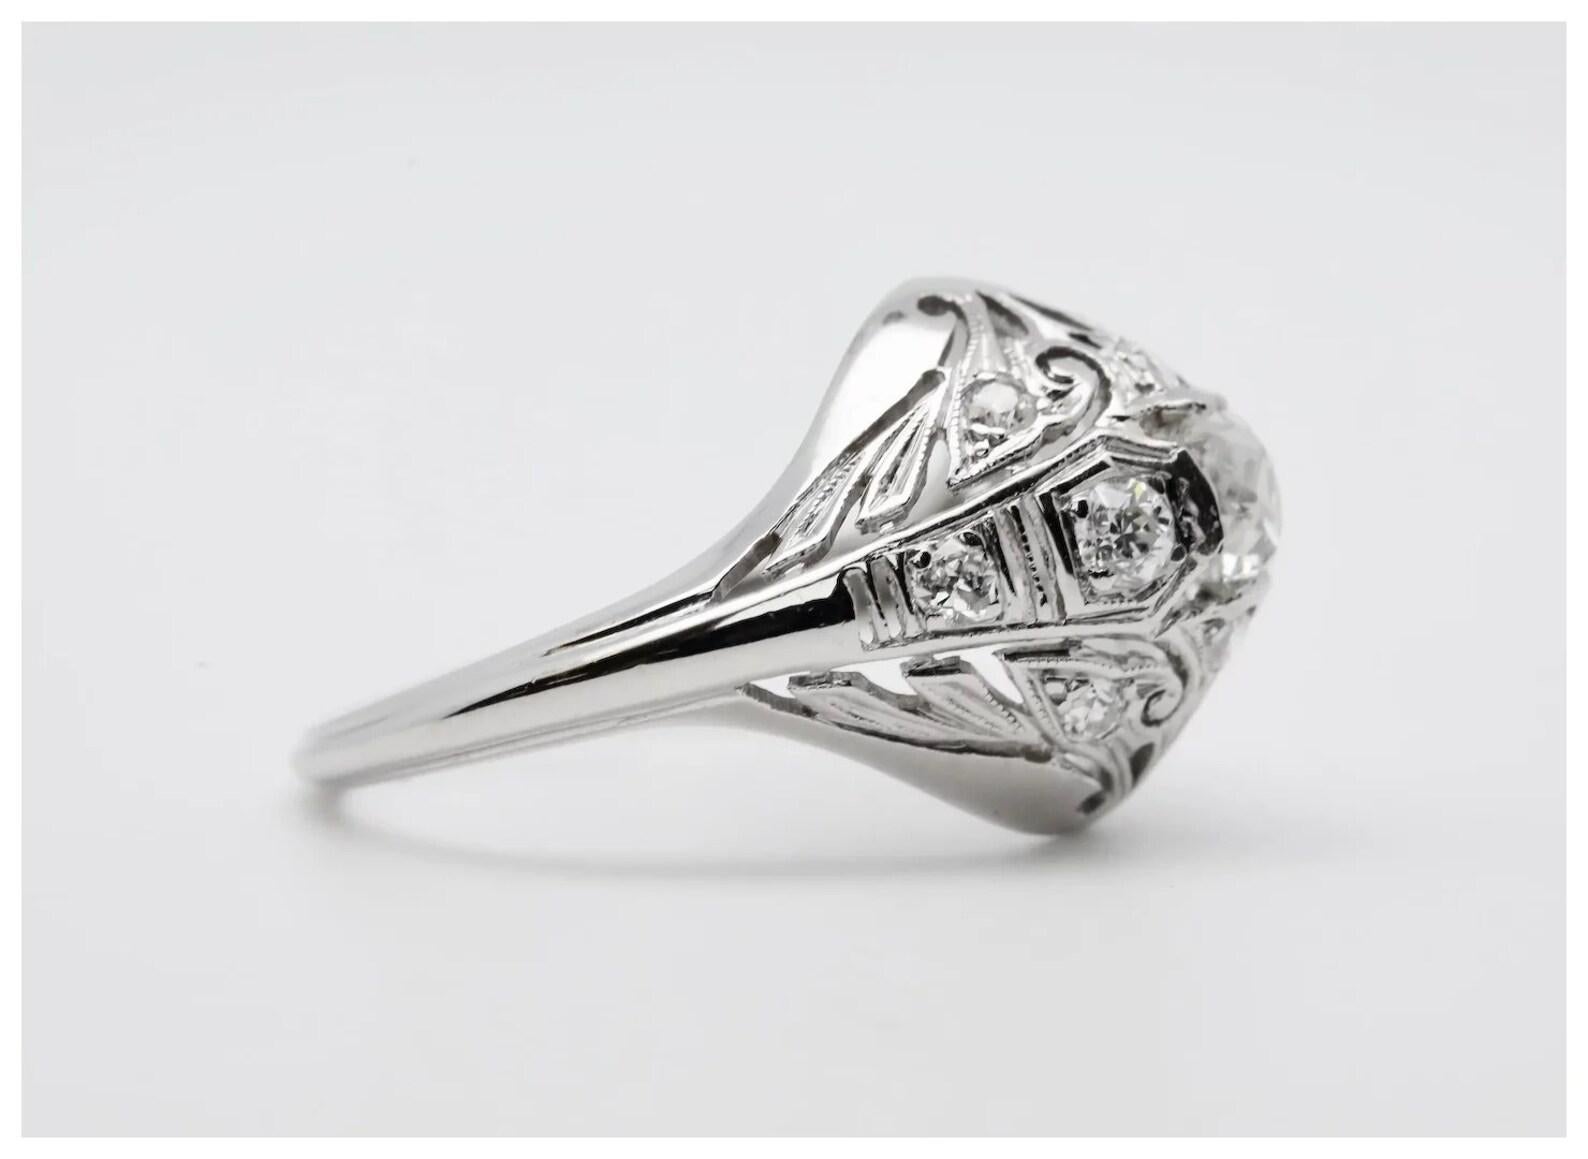 Edwardian 0.71ct Old Mine Cut Diamond Filigree Engagement Ring in Platinum In Good Condition For Sale In Boston, MA